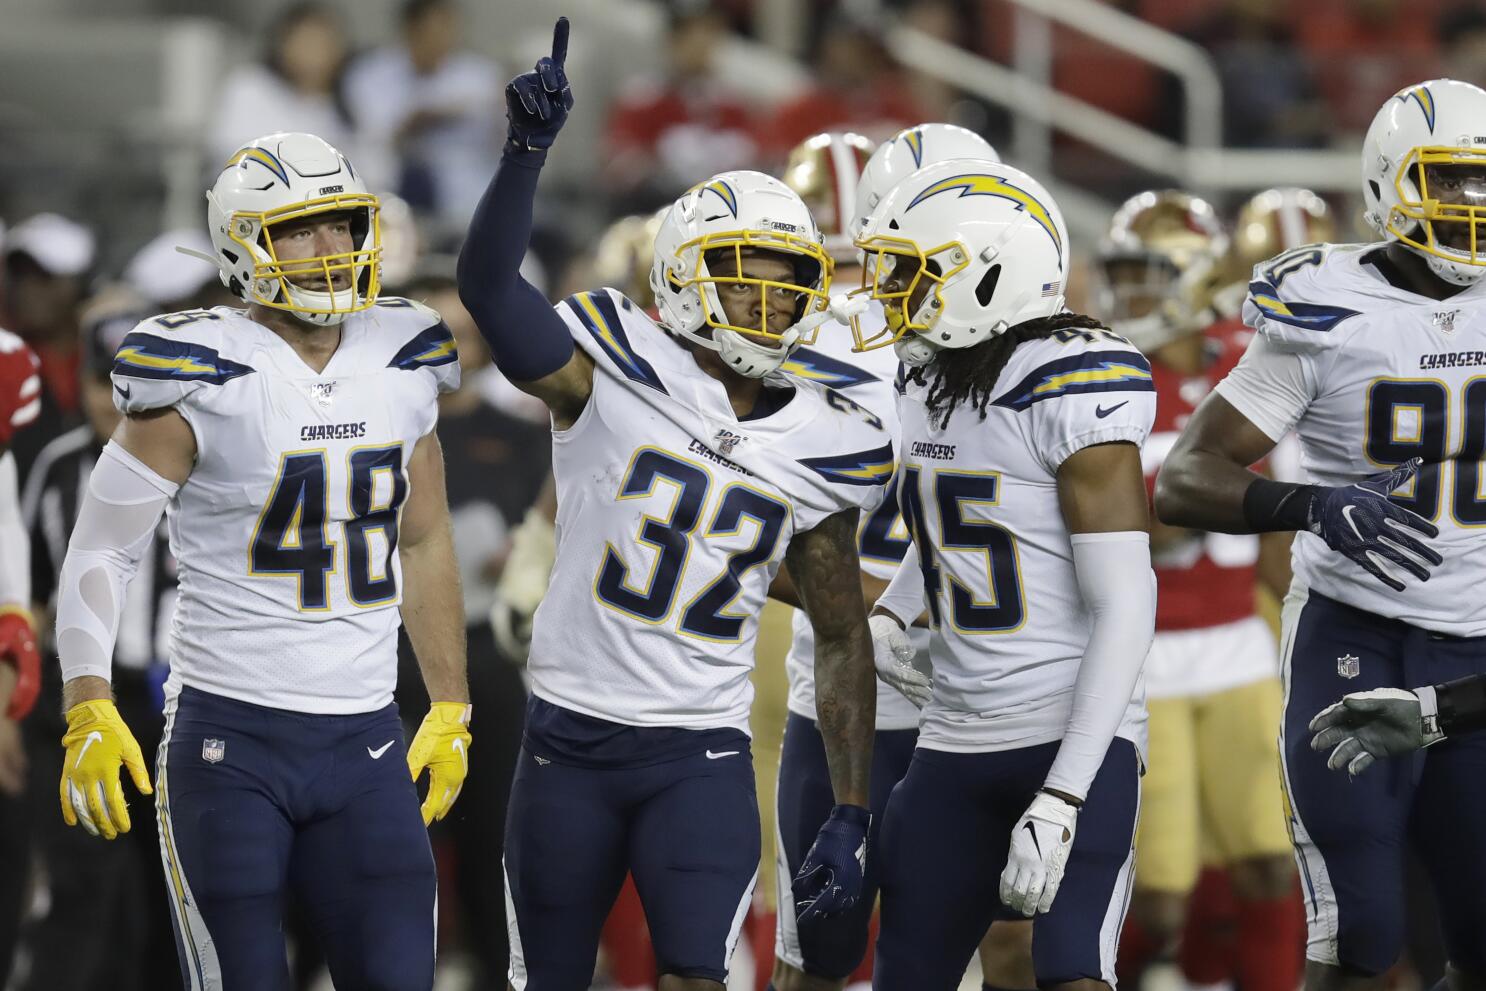 Chargers rookie Nasir Adderley shows his speed and talent in